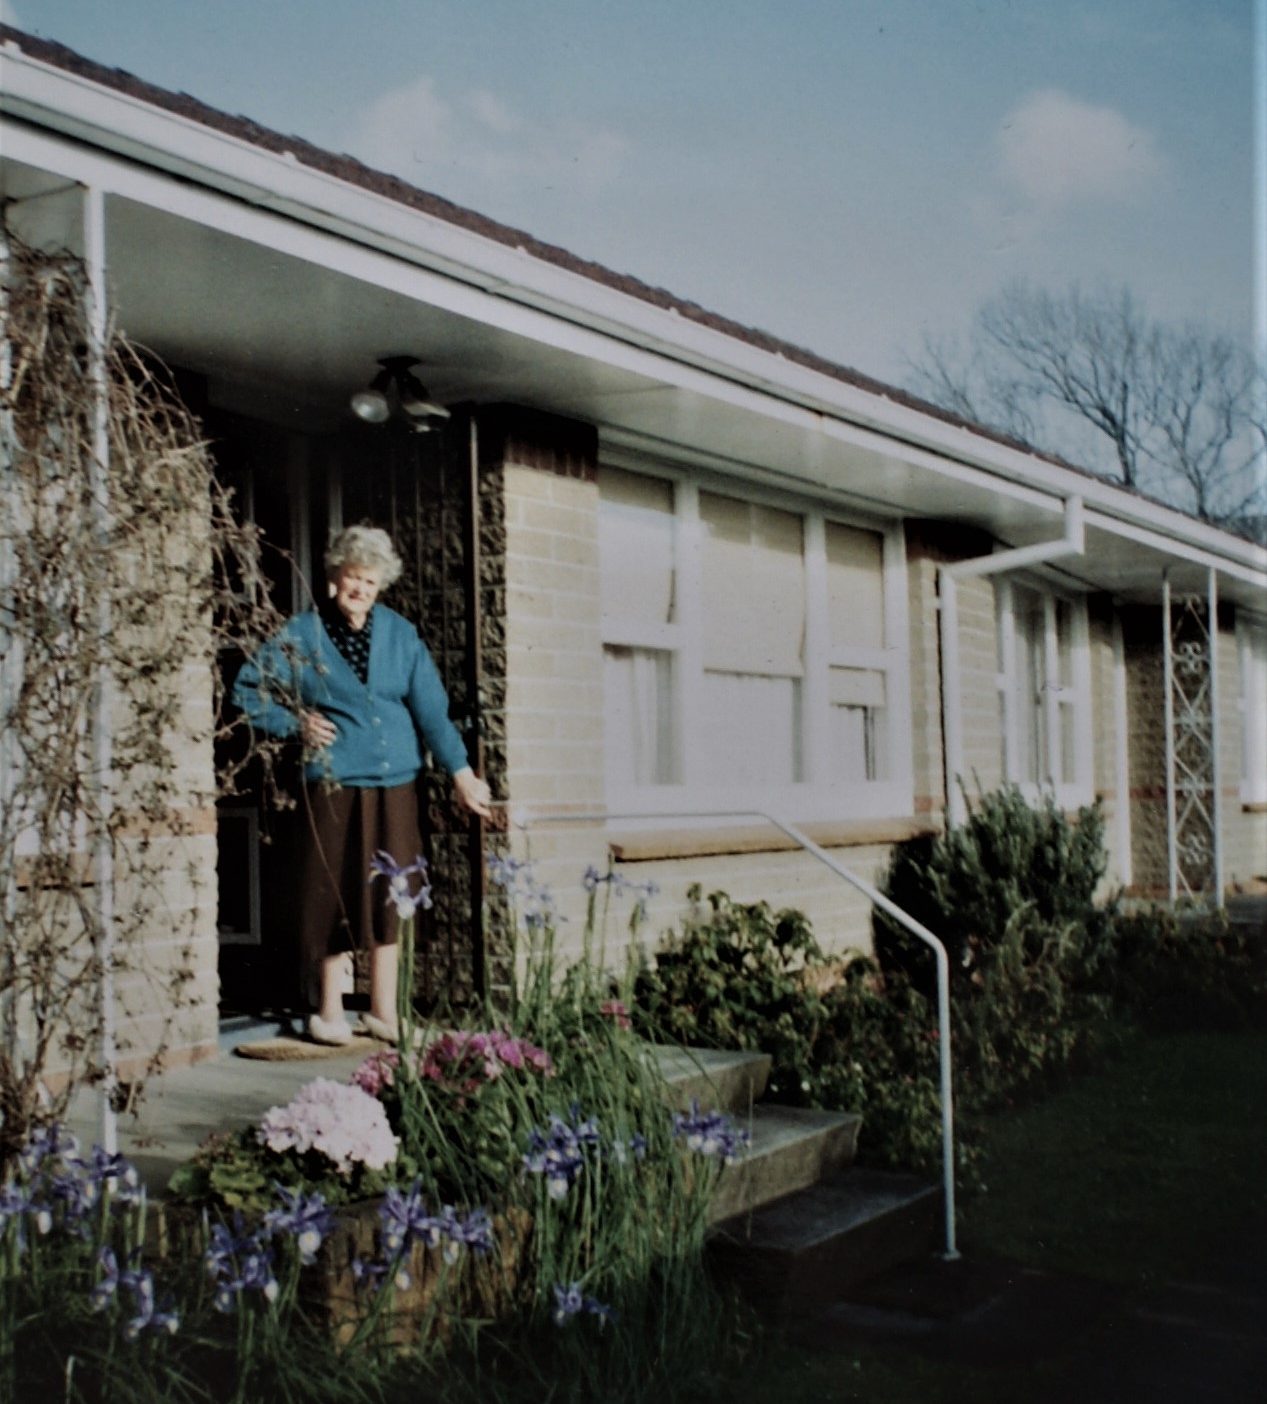 Lesleys Mother Dora stands in her slippers holding open the front door of a sand-coloured brick home unit. In front of the concrete terrace there are purple irises and pink flowers in bloom